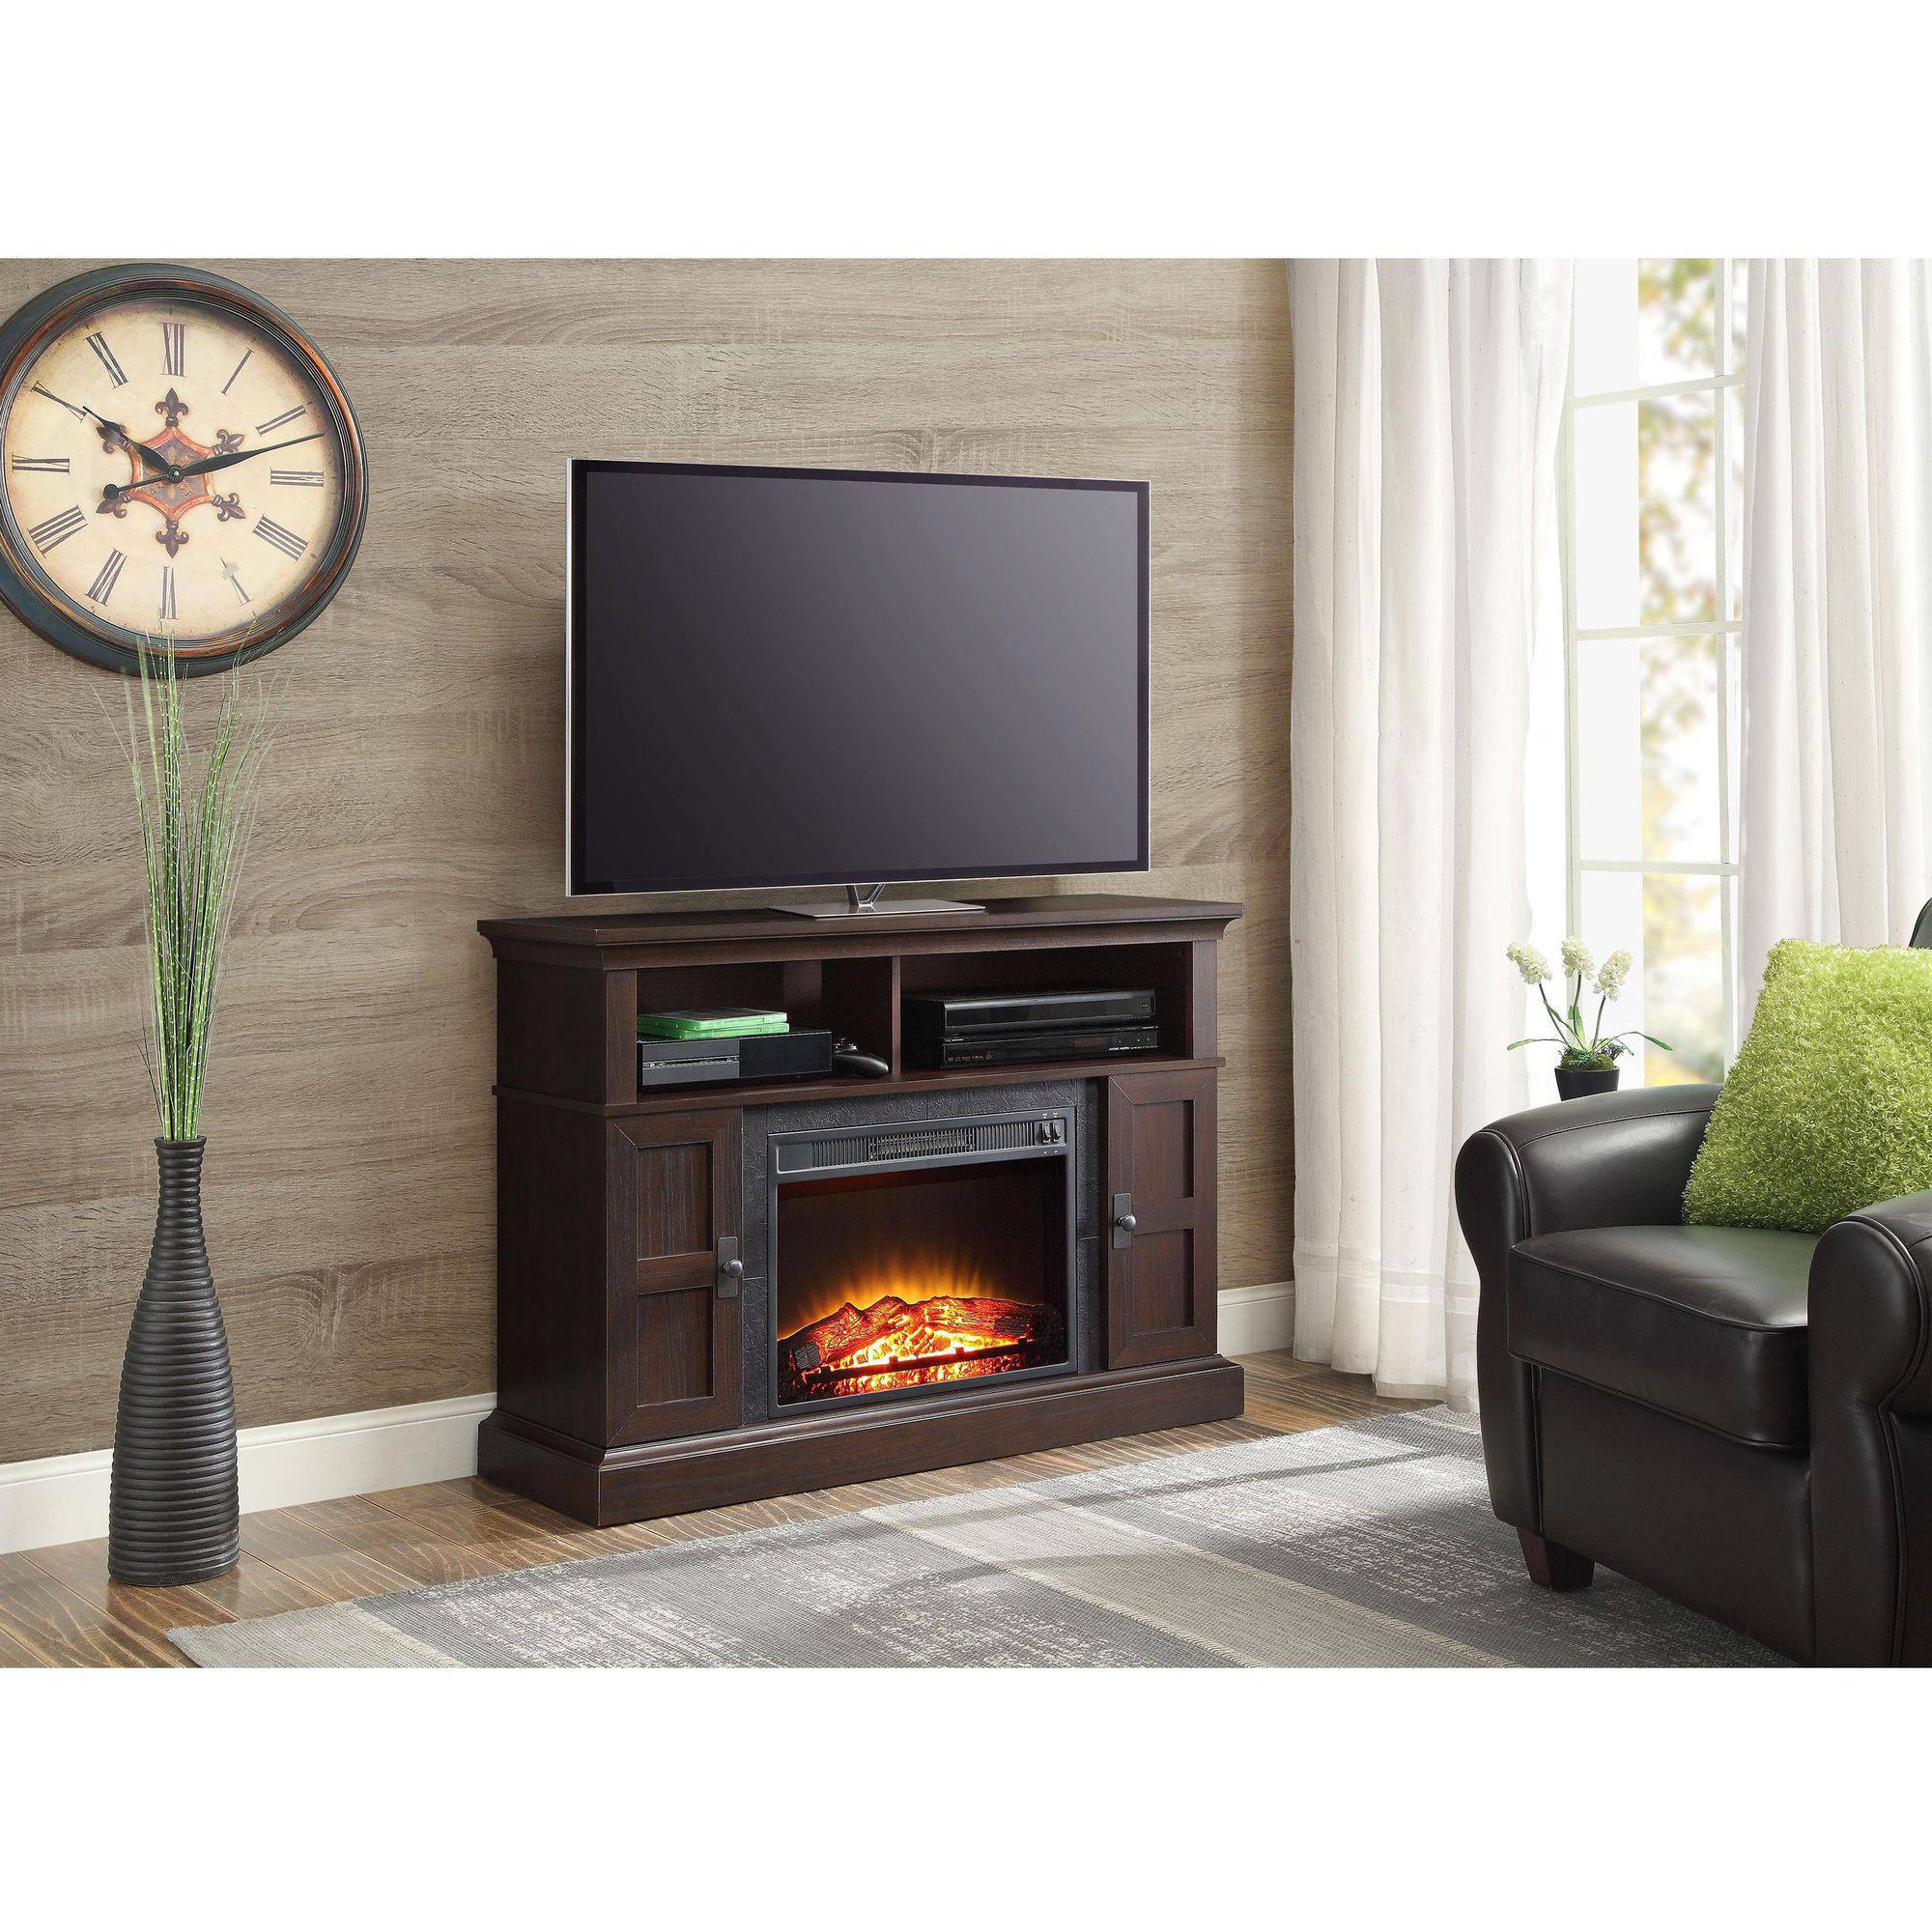 55 Inch Corner Tv Stand with Fireplace Beautiful Fireplace Tv Stand for 55 Tv